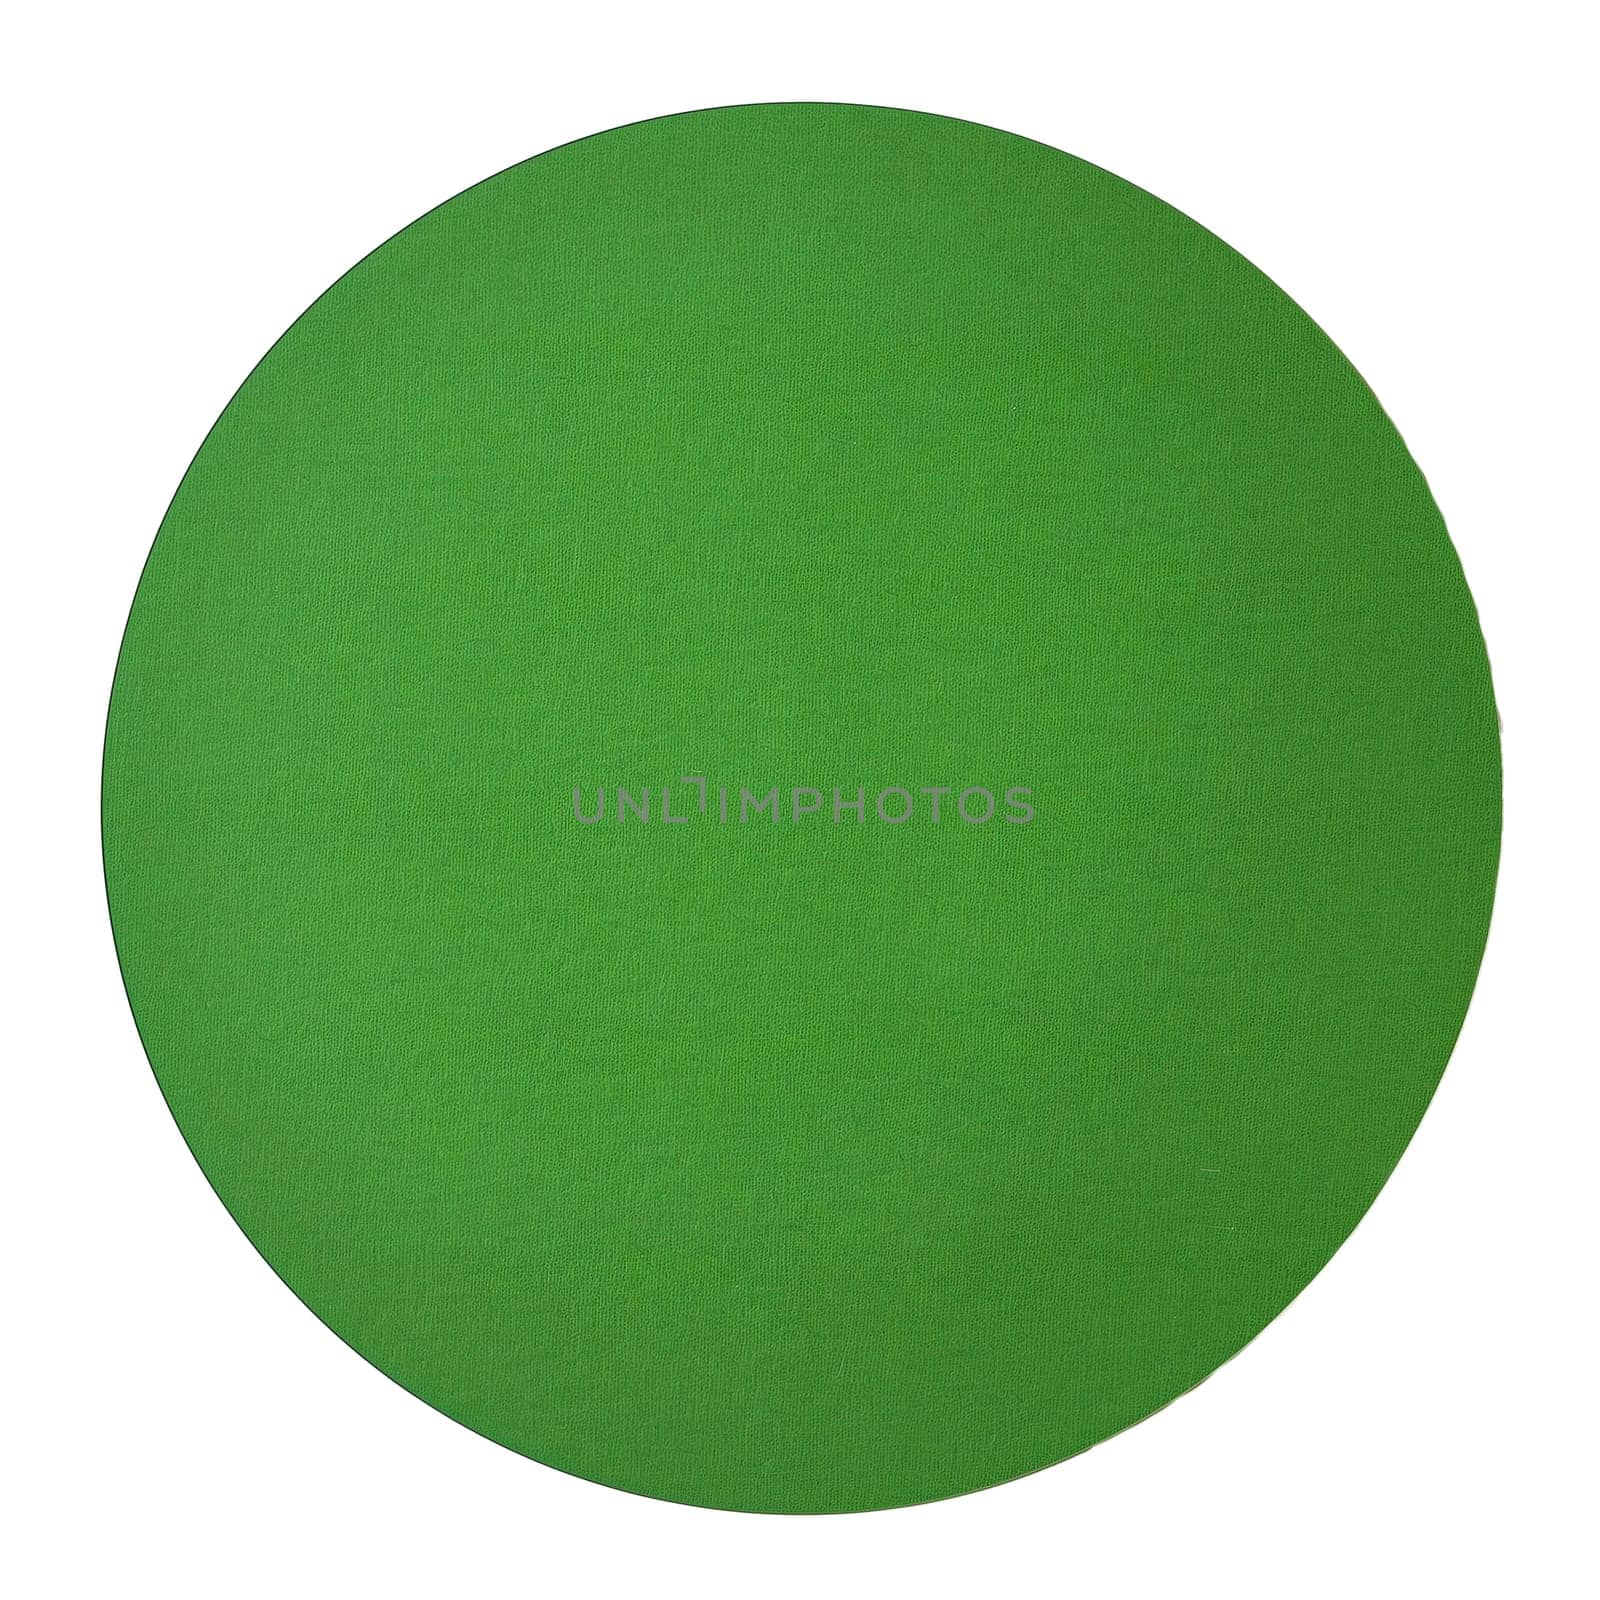 Green round paper textured sheets by Dustick